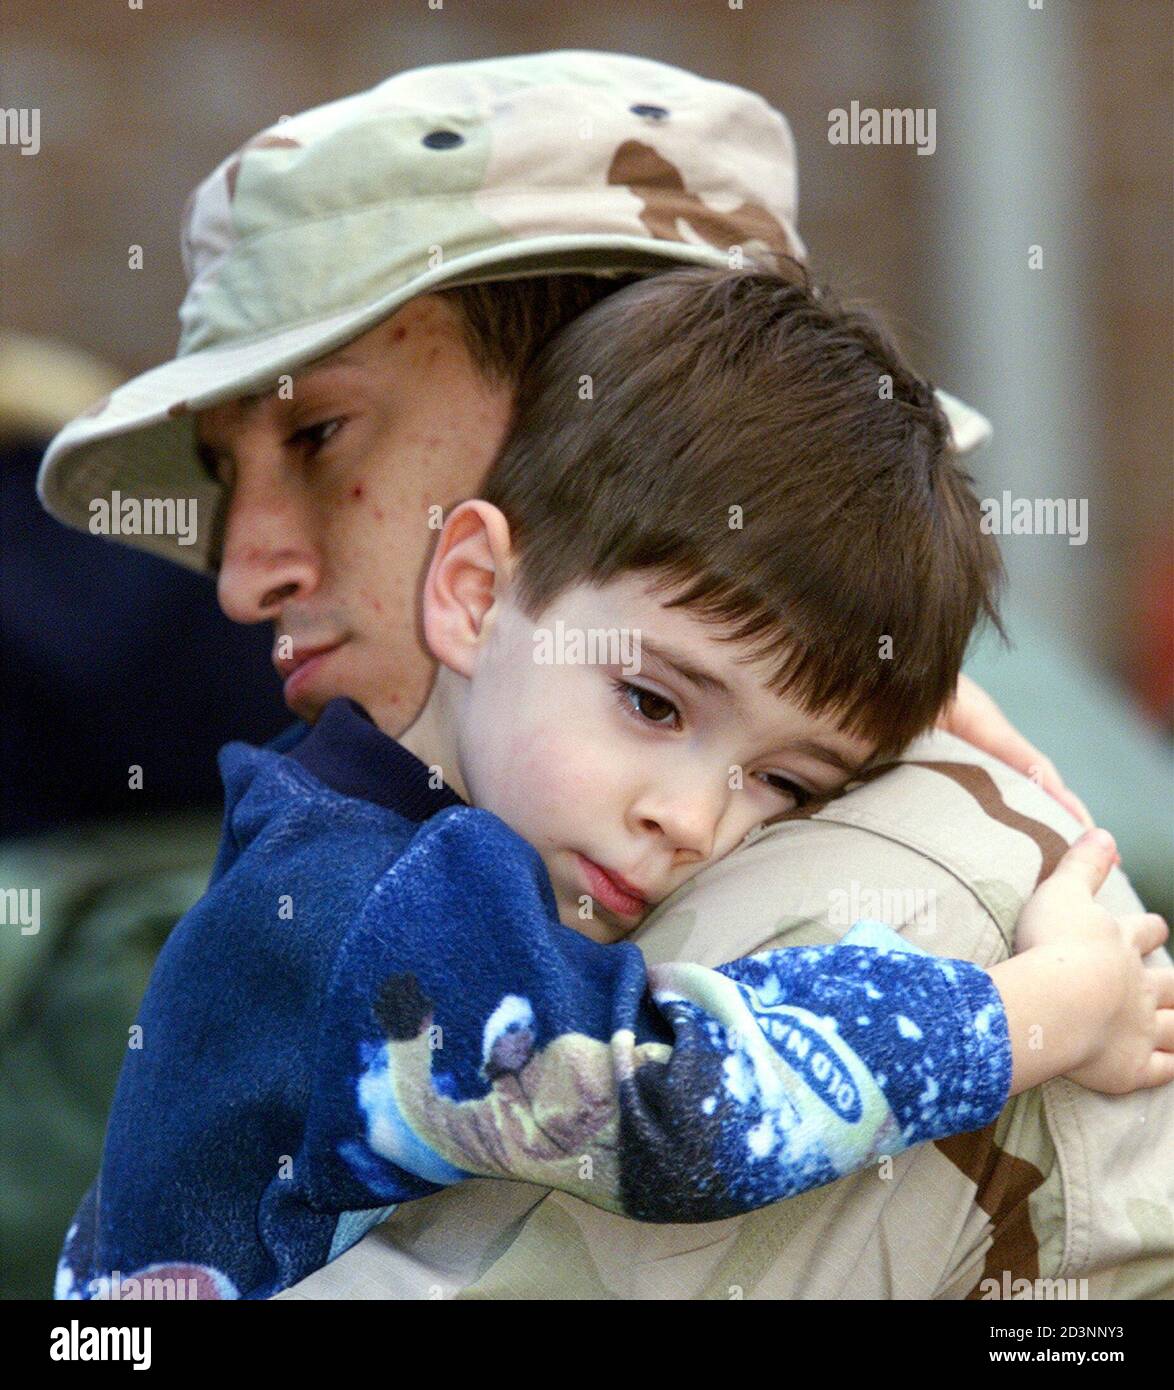 Navy HM-3 Christopher Bryant holds his son Branden, 5-yrs old, at Camp LeJeune, North Carolina before he leaves on a bus for Cherry Point Marine Corps Air Station, North Carolina on January 10, 2003. The United States will soon send 7,000 Marines from Camp Lejeune, North Carolina, to the Gulf to join a major U.S. military build-up in the region for possible war with Iraq, the Marine Corps said on Friday. REUTERS/Randy Davey  RD/MMR Stock Photo